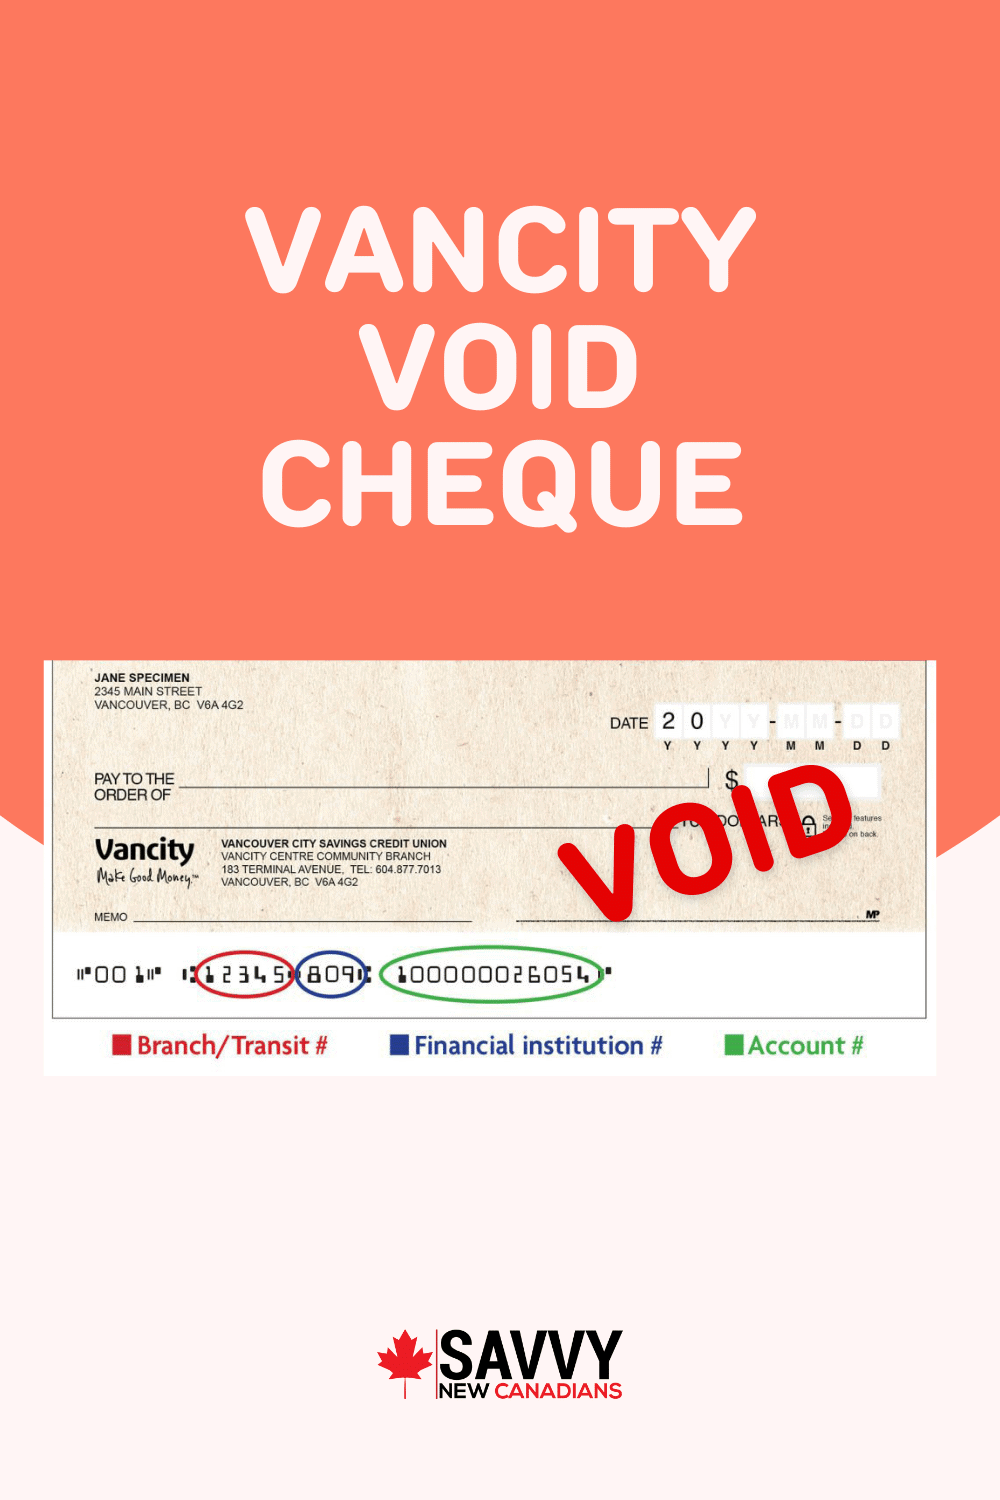 Vancity Void Cheque: How To Setup Direct Deposits and Pre-Authorized Payments